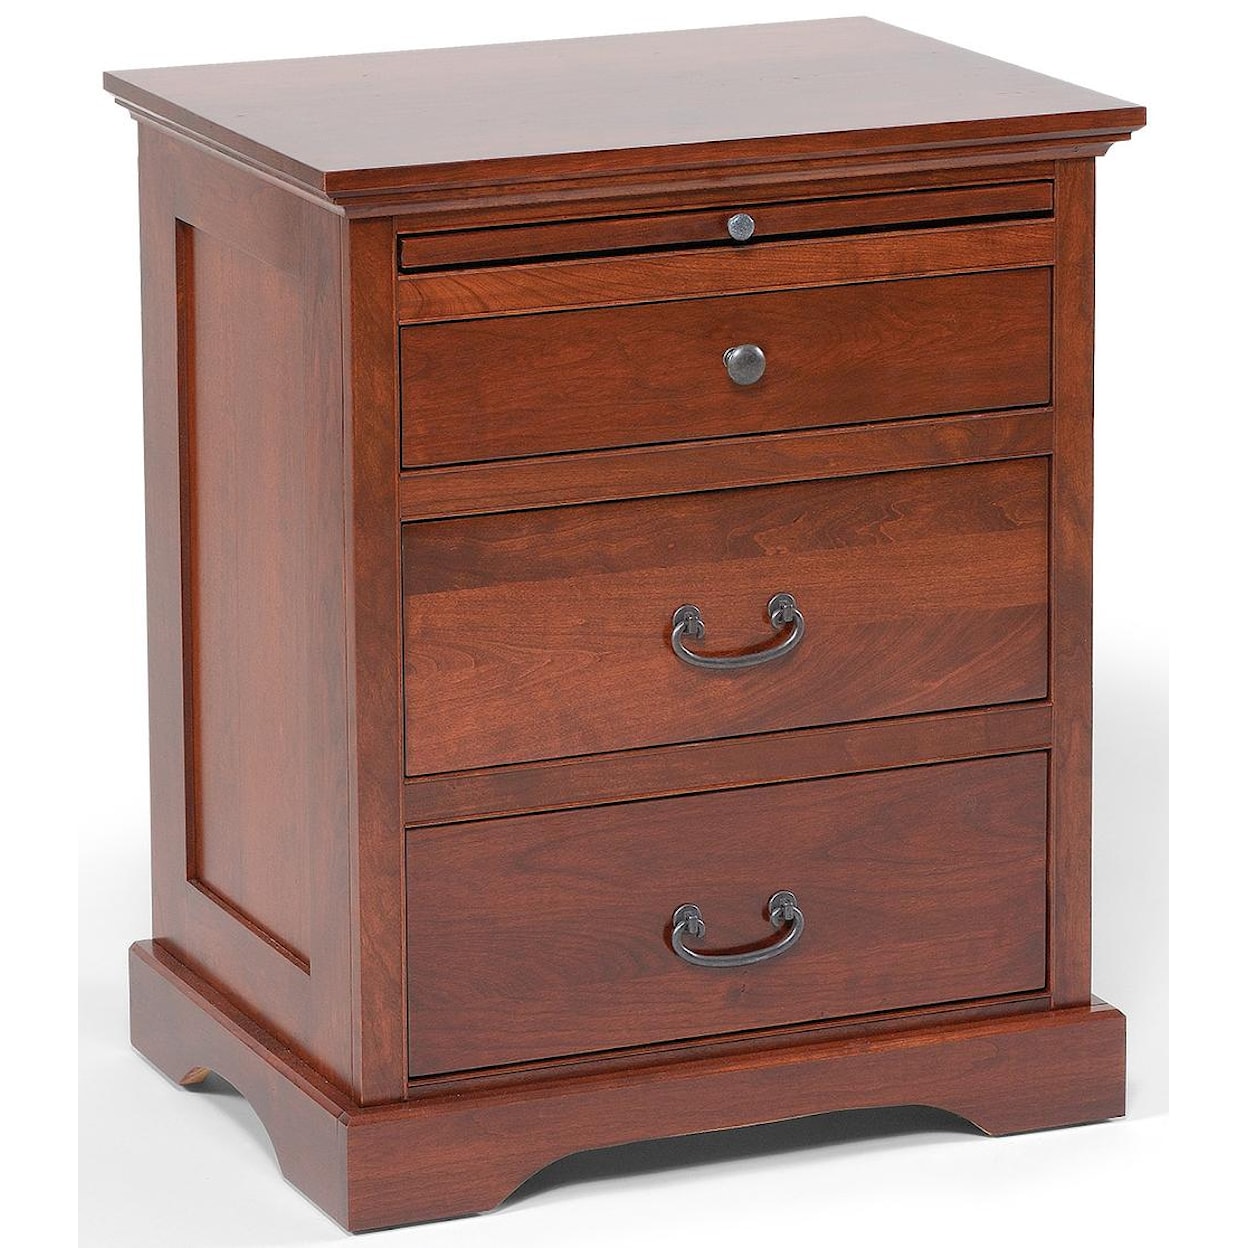 Daniel's Amish Elegance 3-Drawer Nightstand with Pullout Shelf